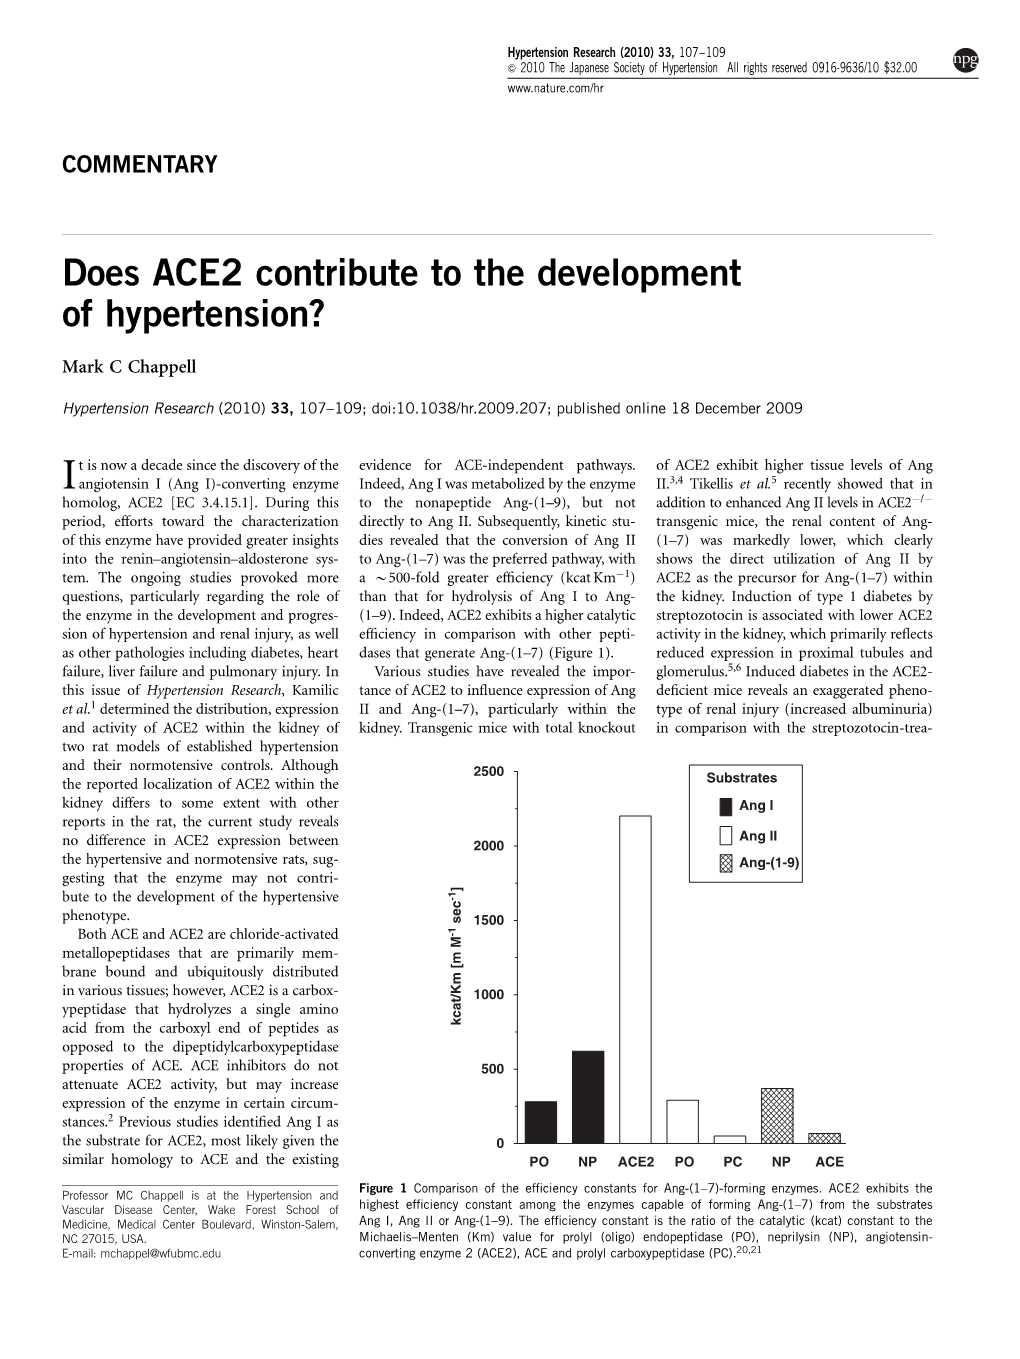 Does ACE2 Contribute to the Development of Hypertension&Quest;